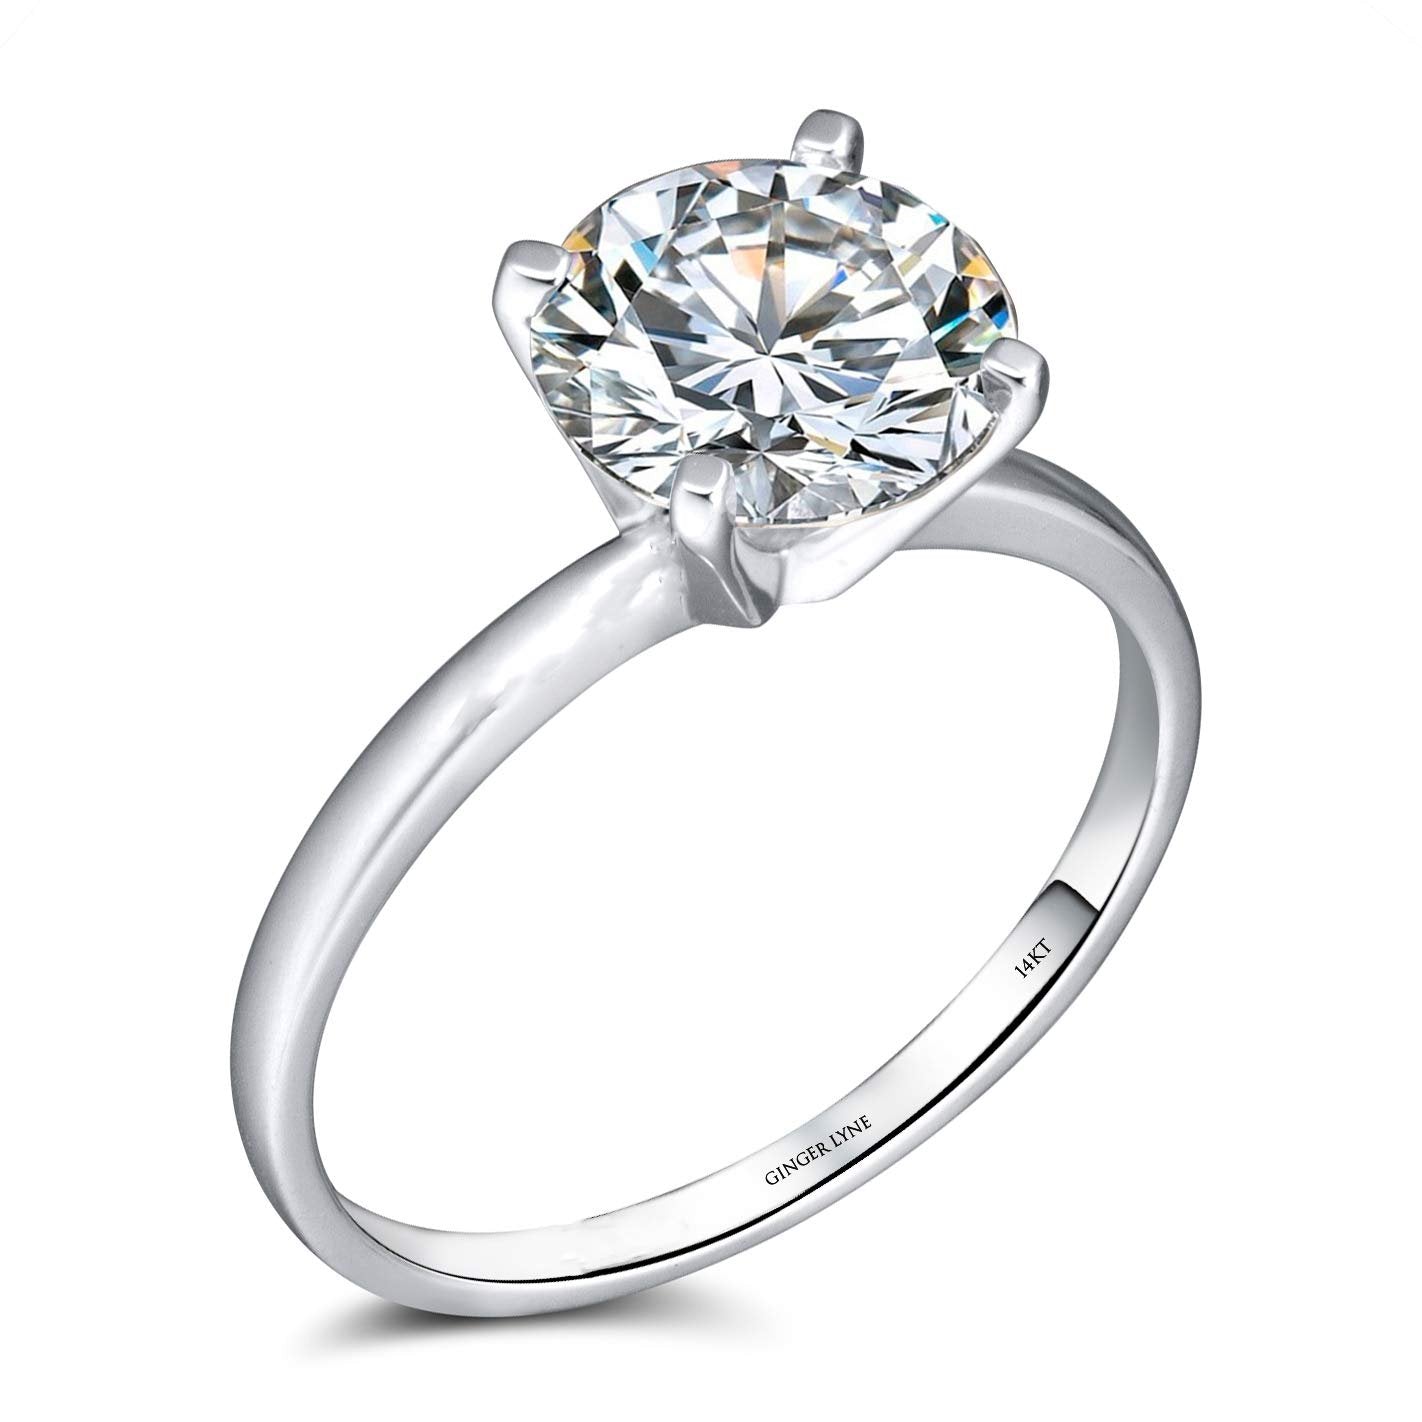 Amore Engagement Ring Women 2 Ct Moissanite 14K Gold Solitaire Ginger Lyne Collection - 2 CT,10